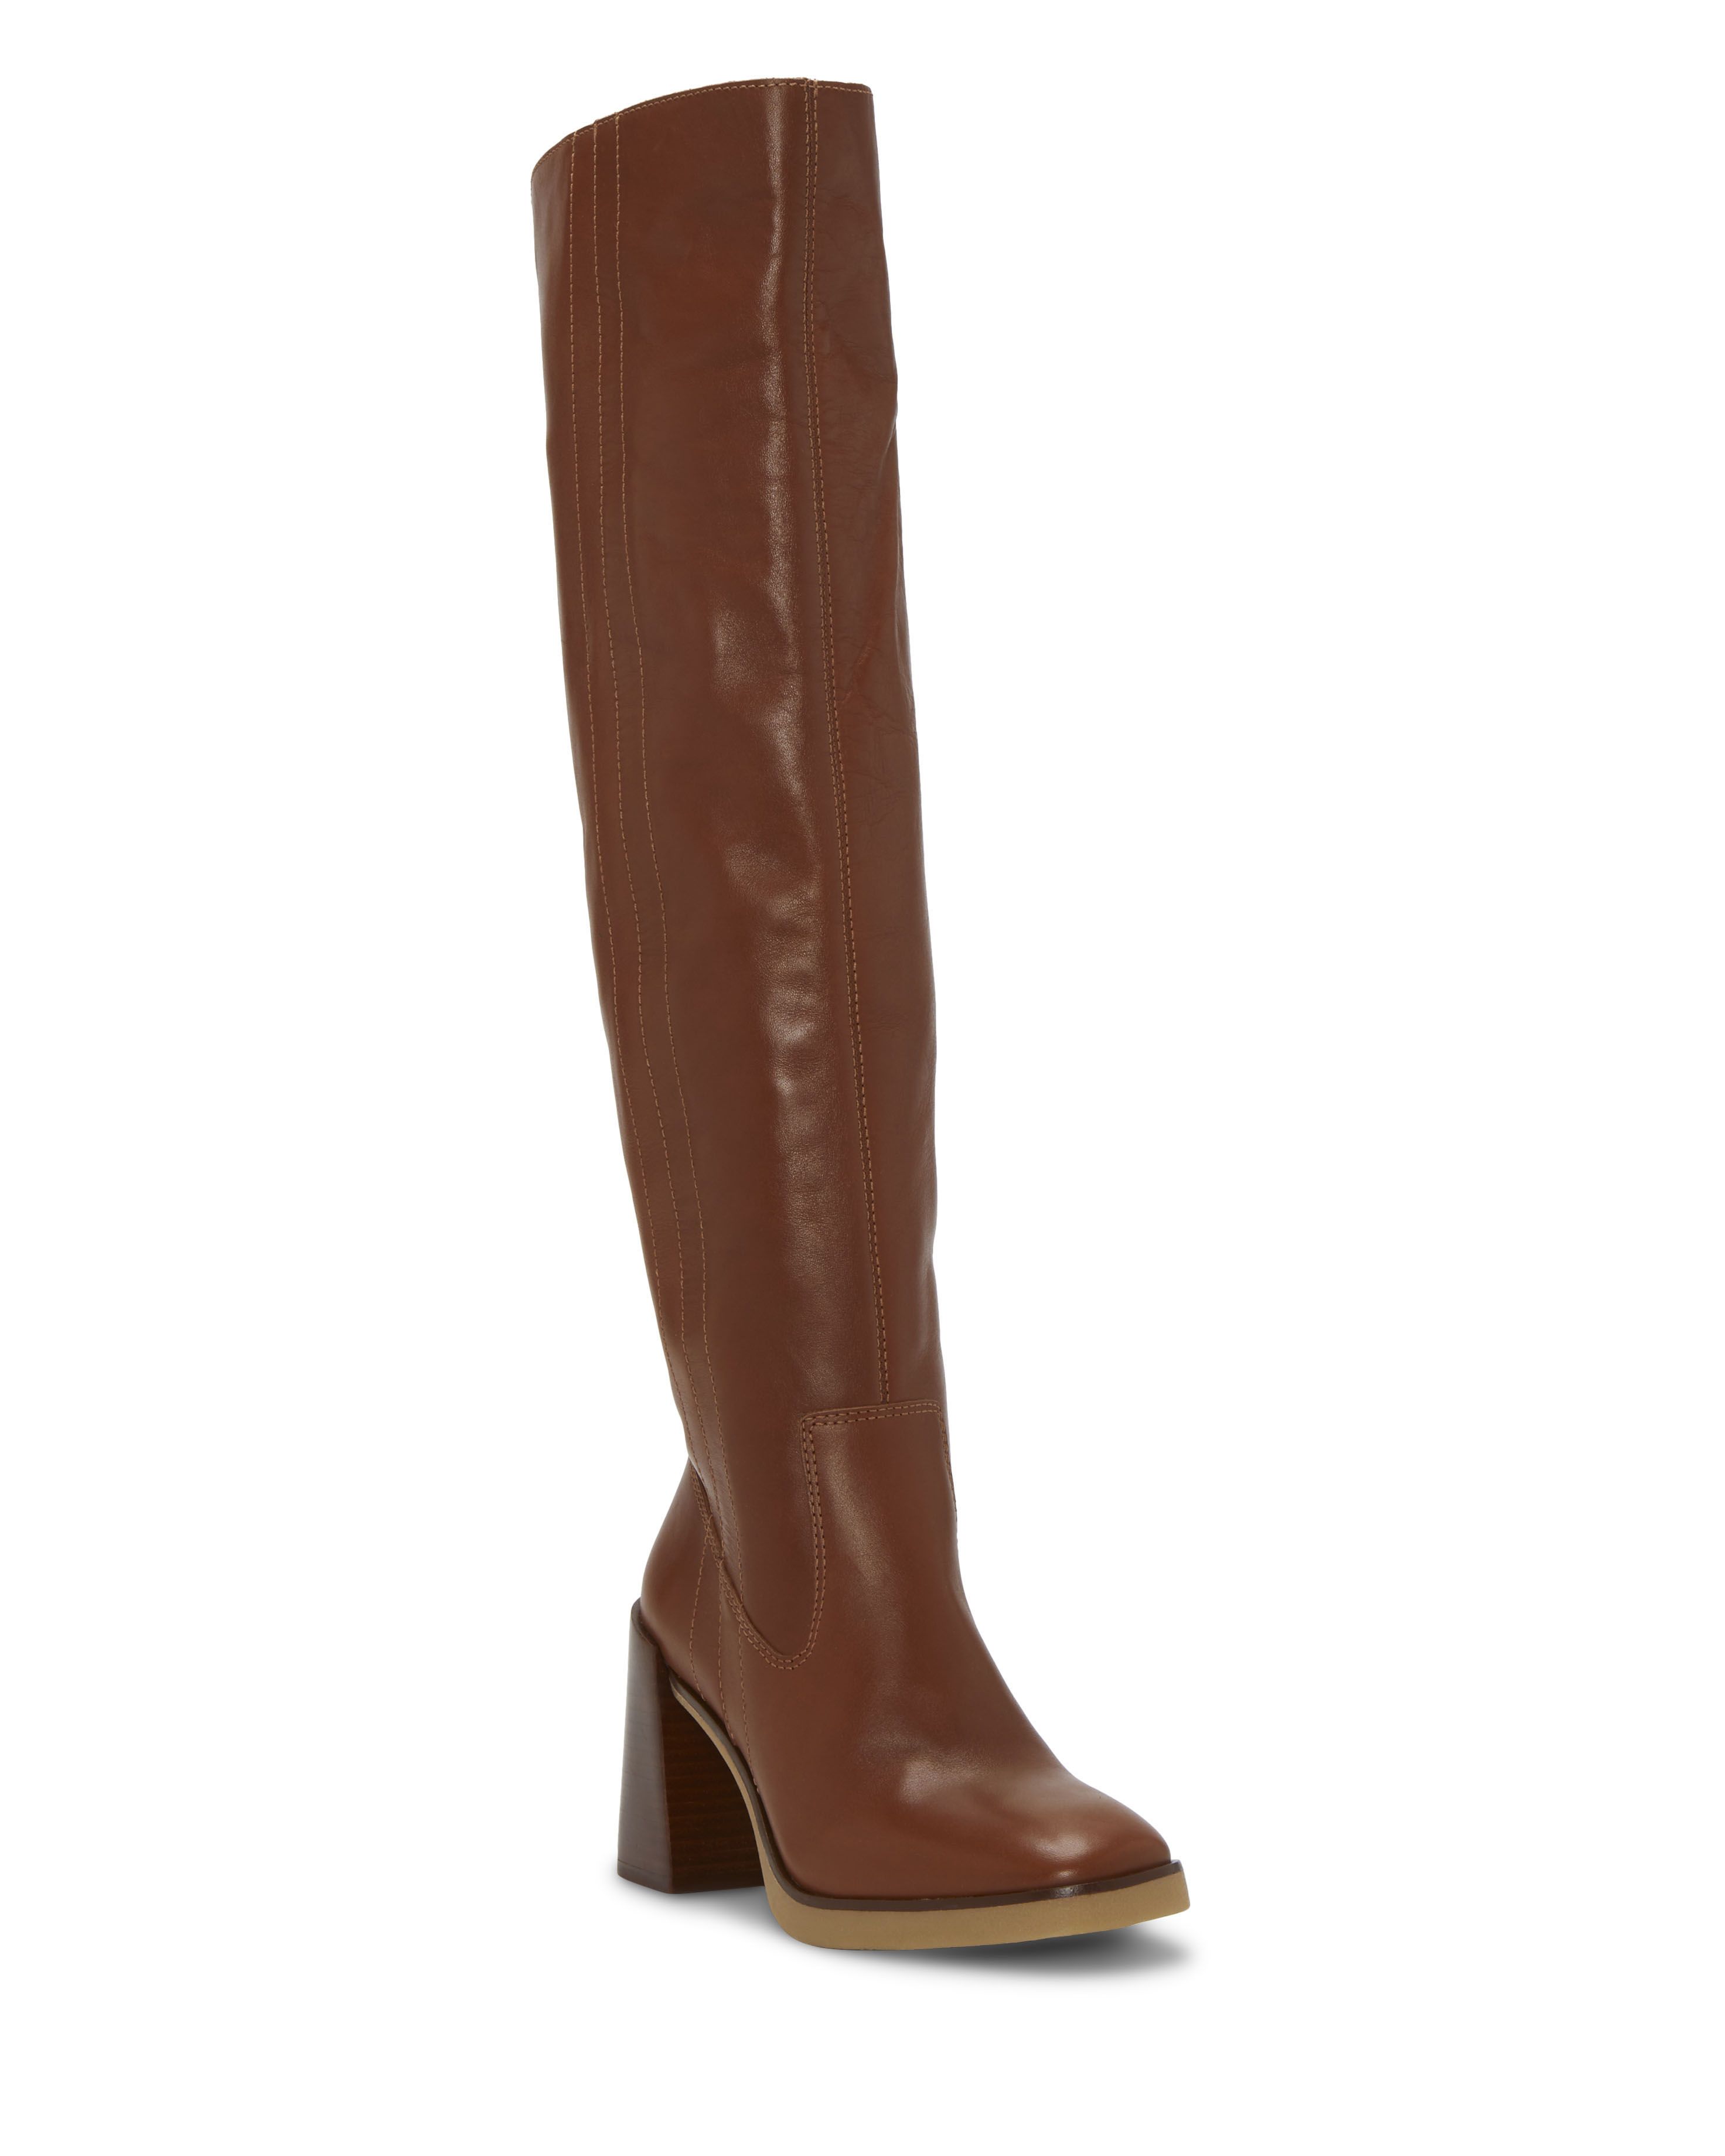 Vince Camuto Eyana Boot | Vince Camuto